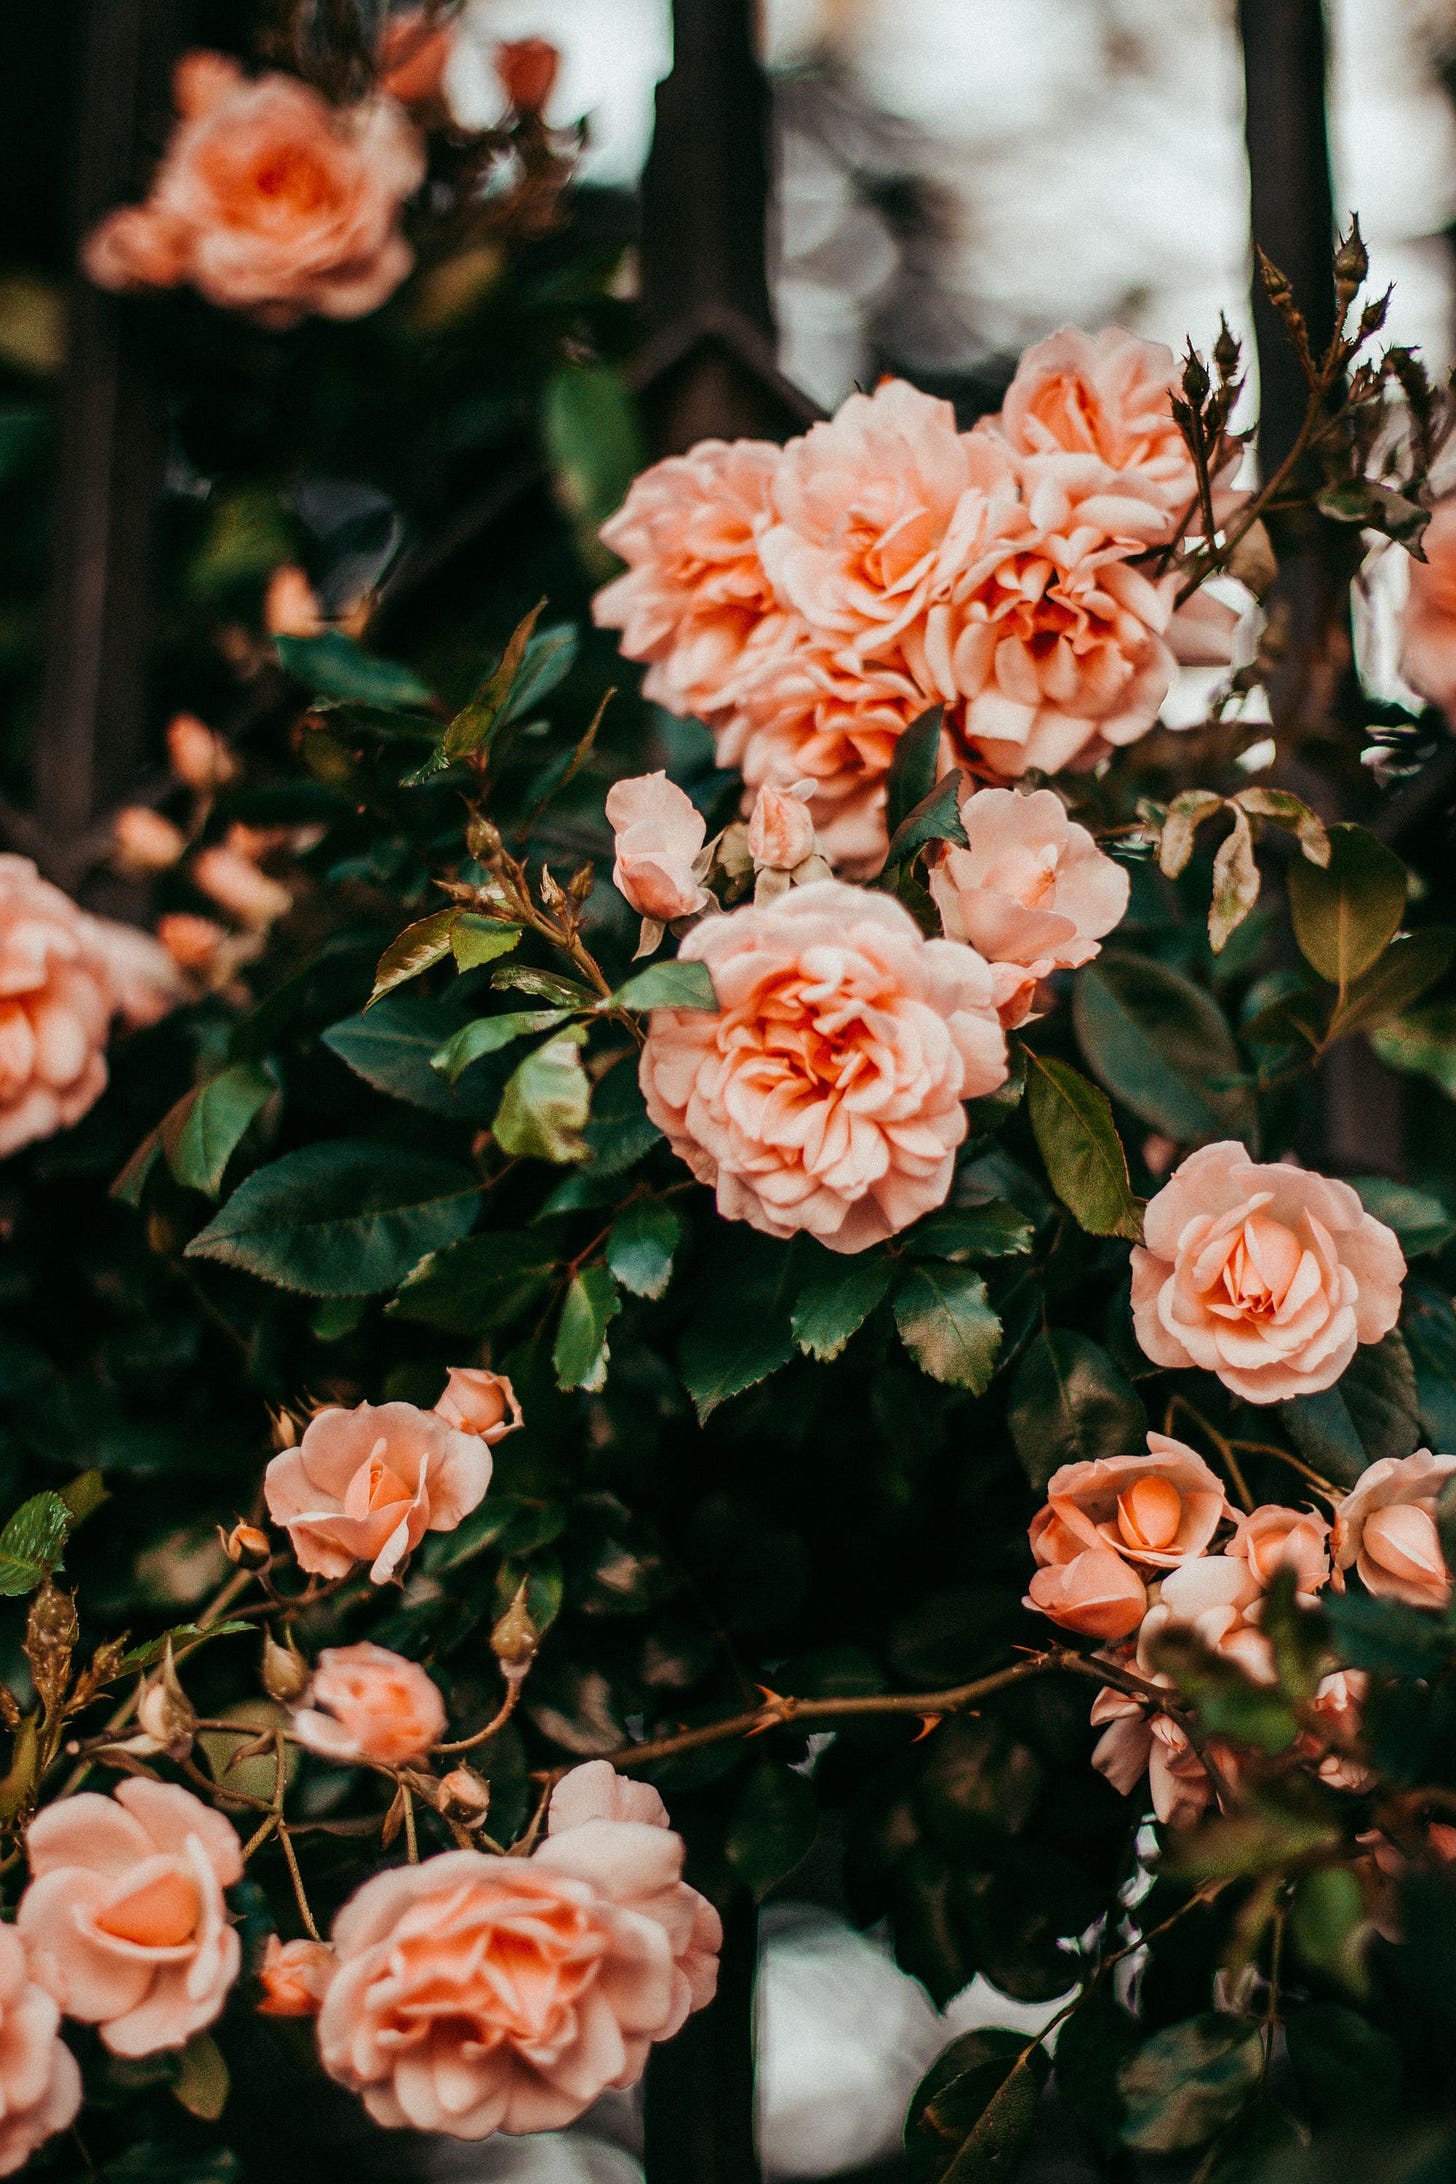 Photo of Pink Roses by Adrianna Calvo from Pexels